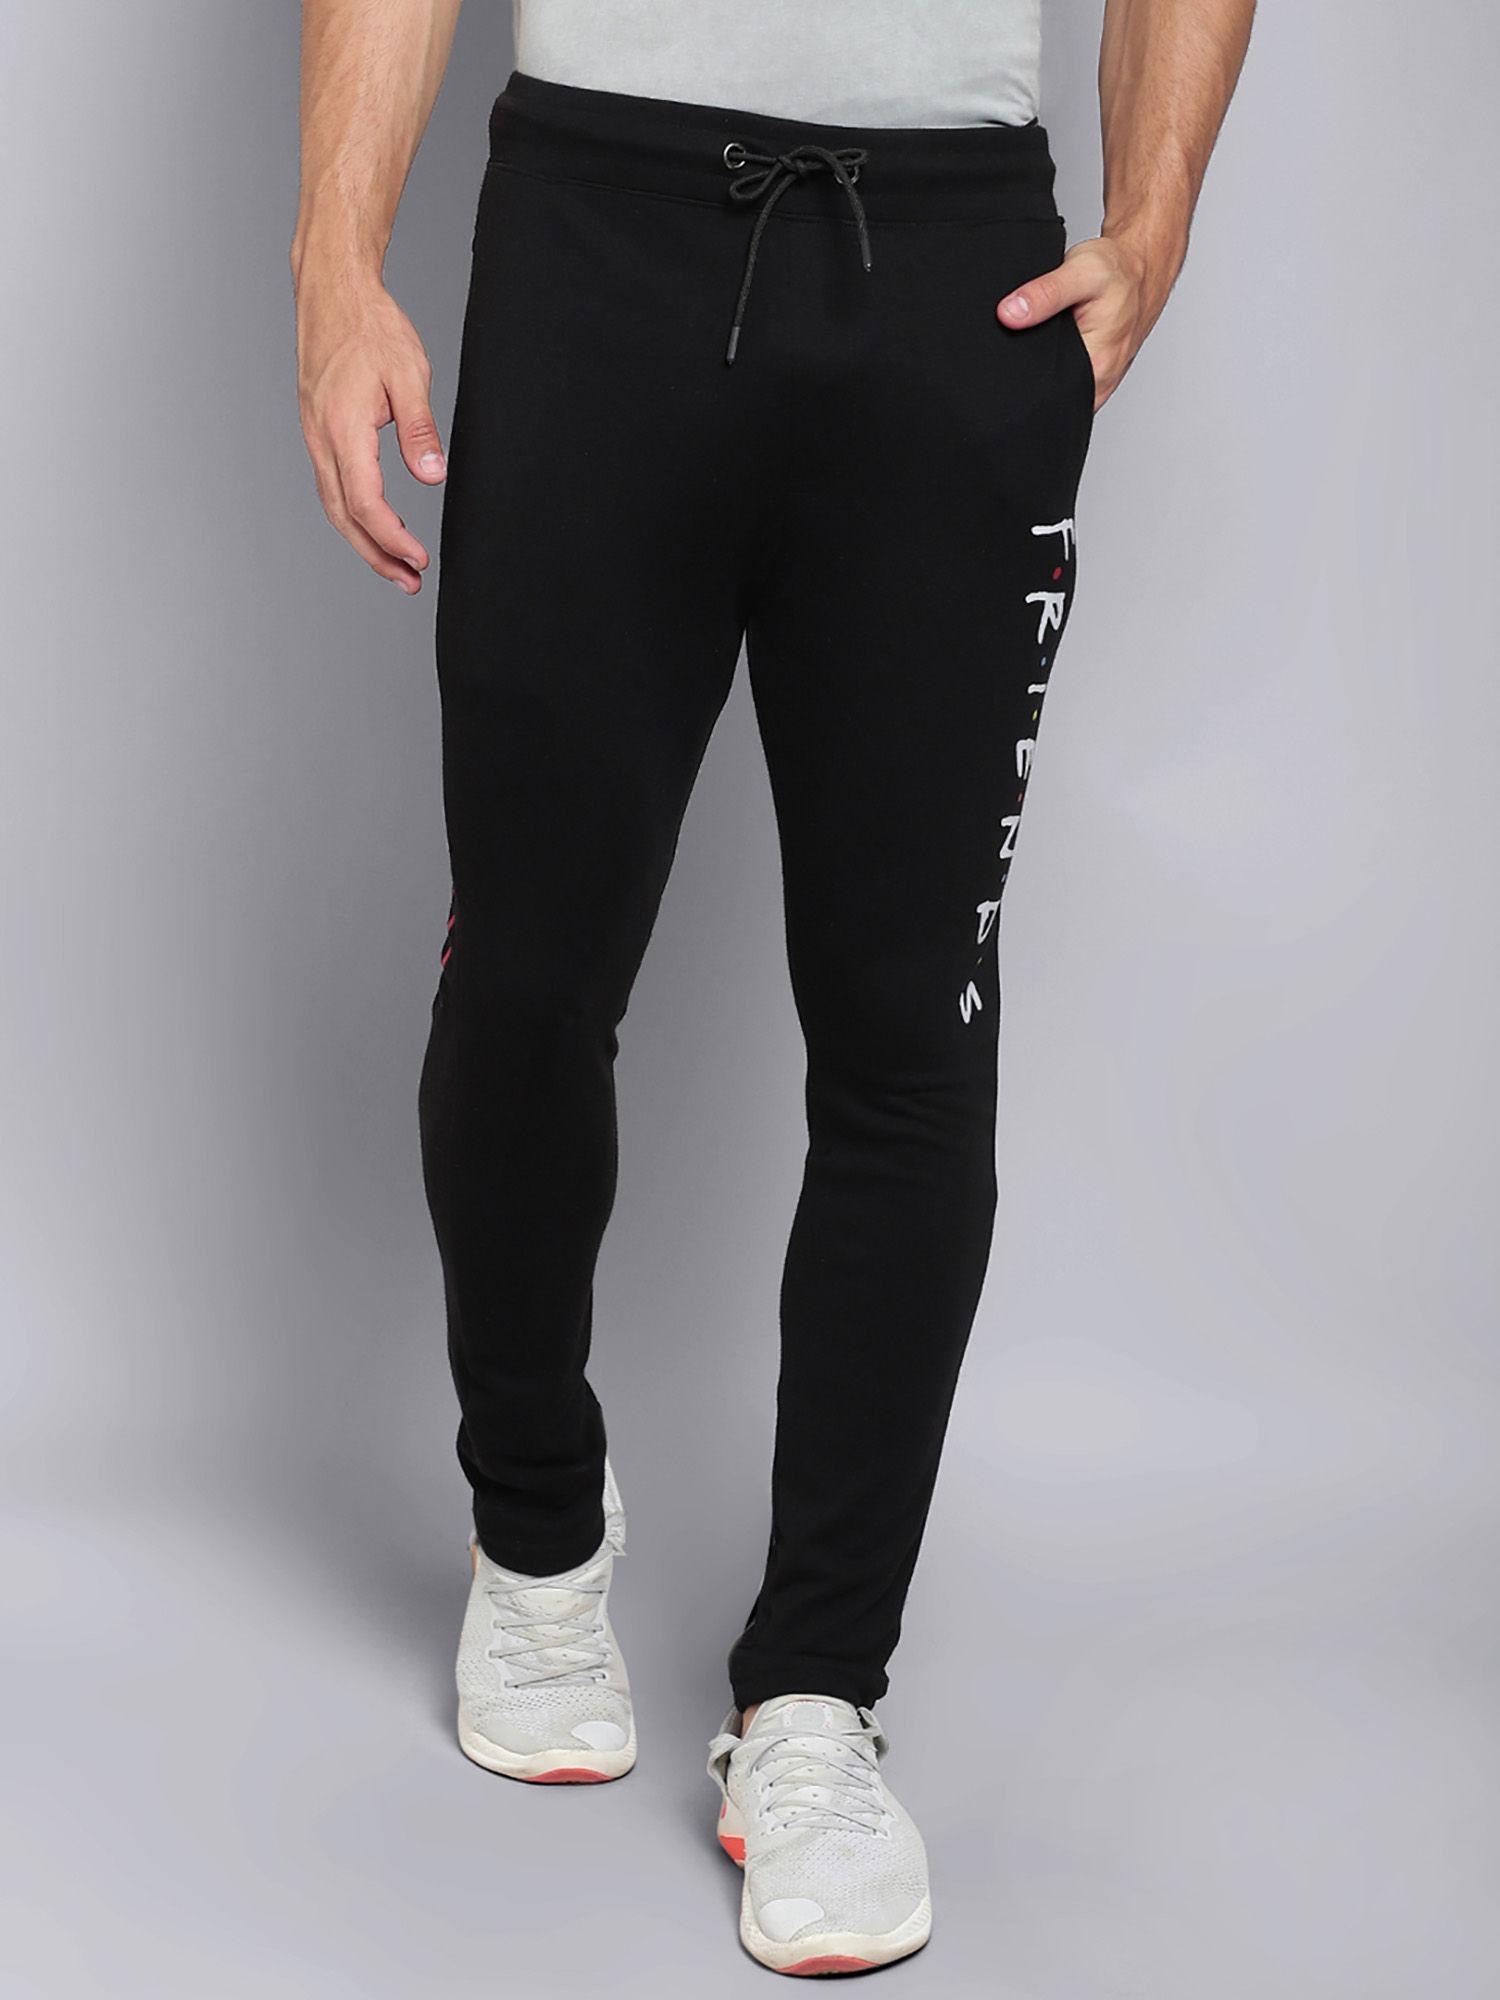 friends featured black joggers for men